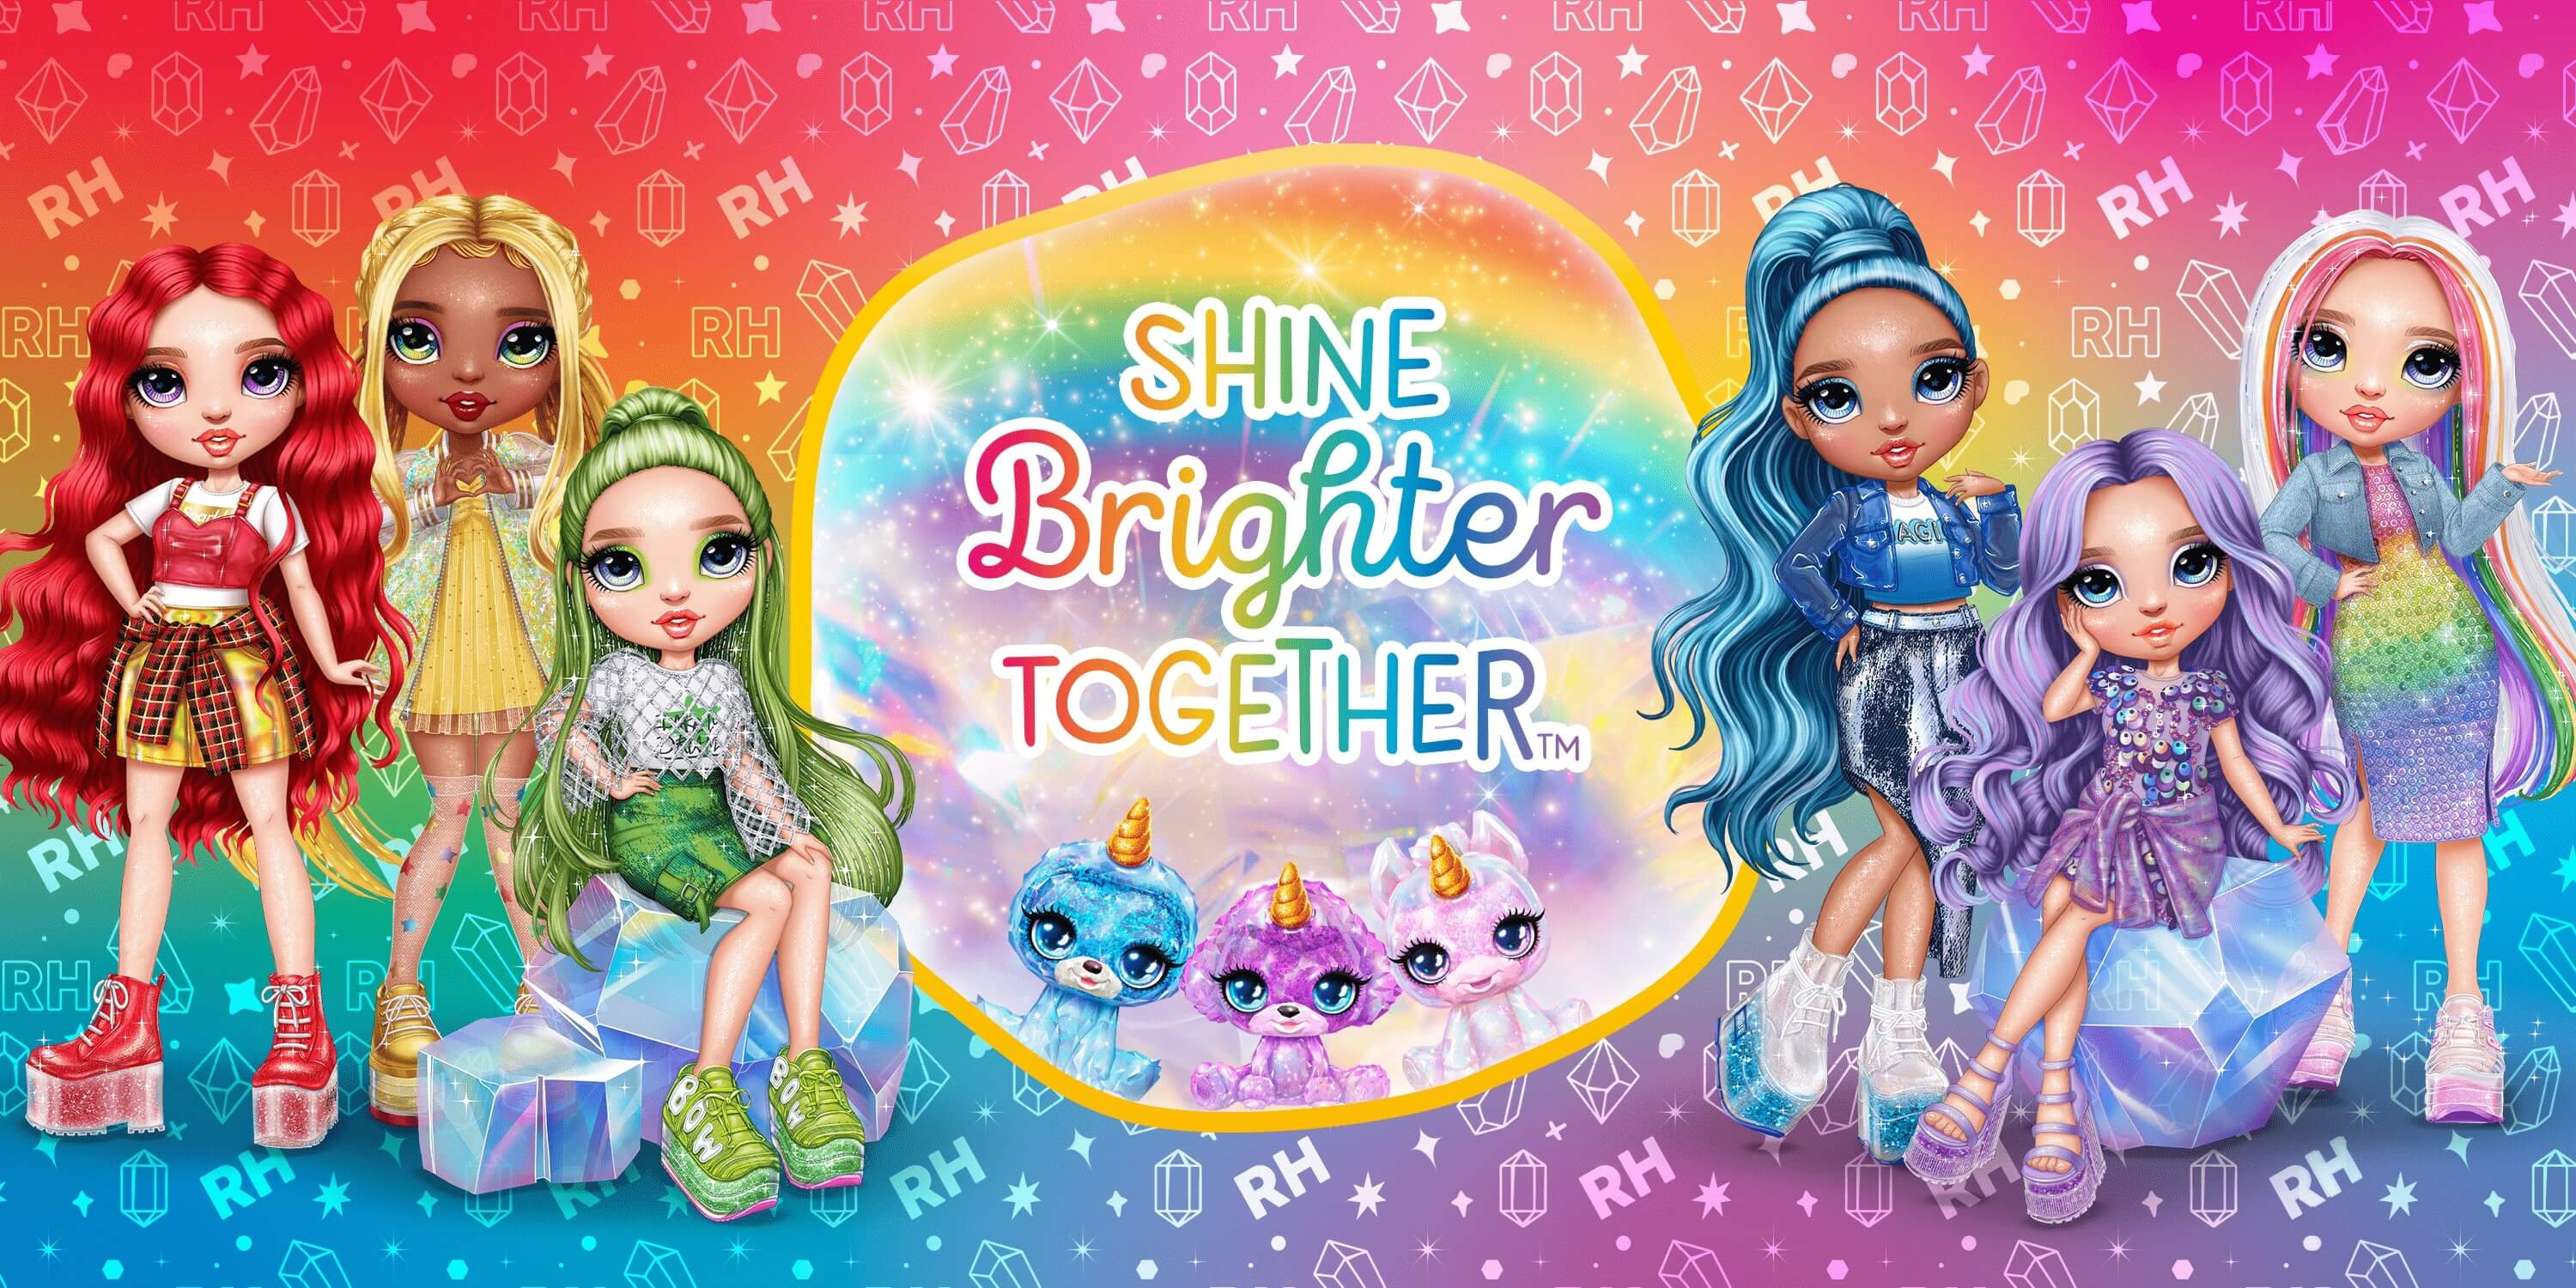 Rainbow Hight - Shine Brighter Together poster